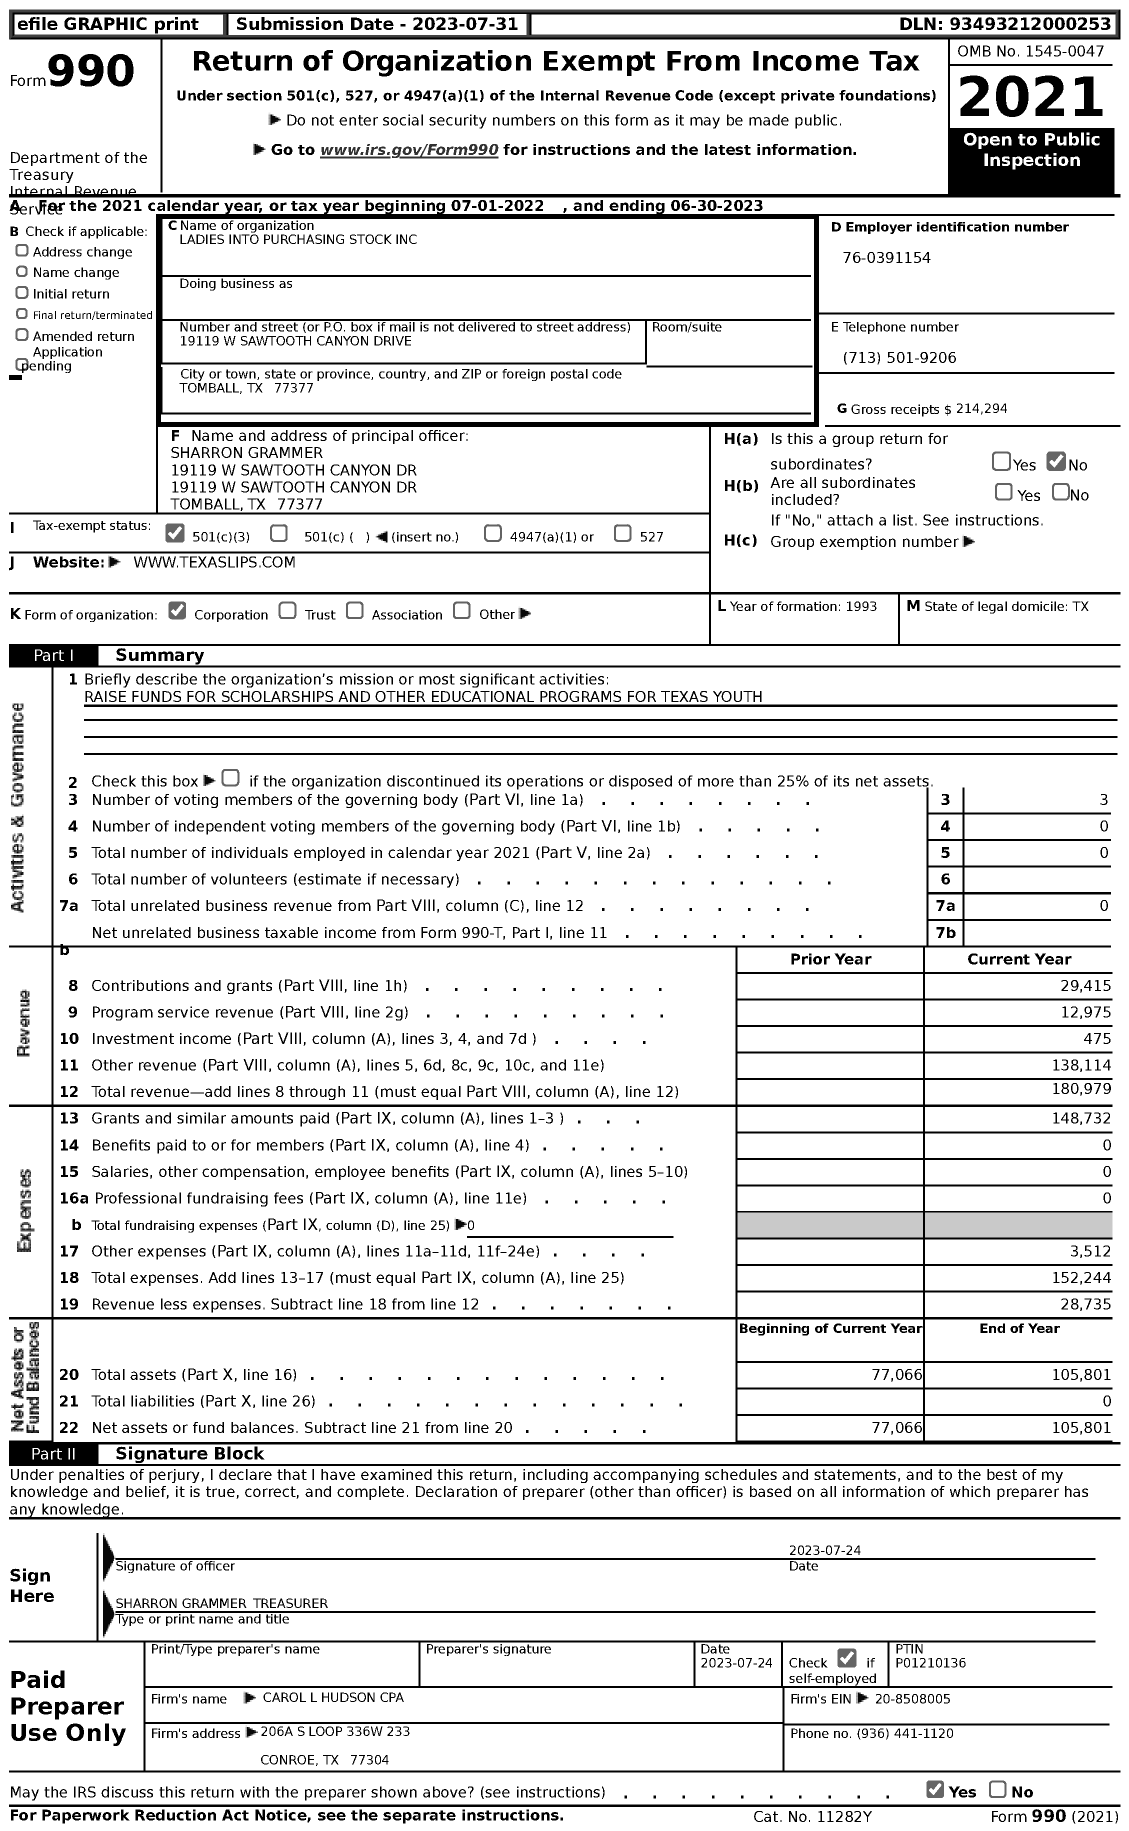 Image of first page of 2022 Form 990 for Ladies Into Purchasing Stock